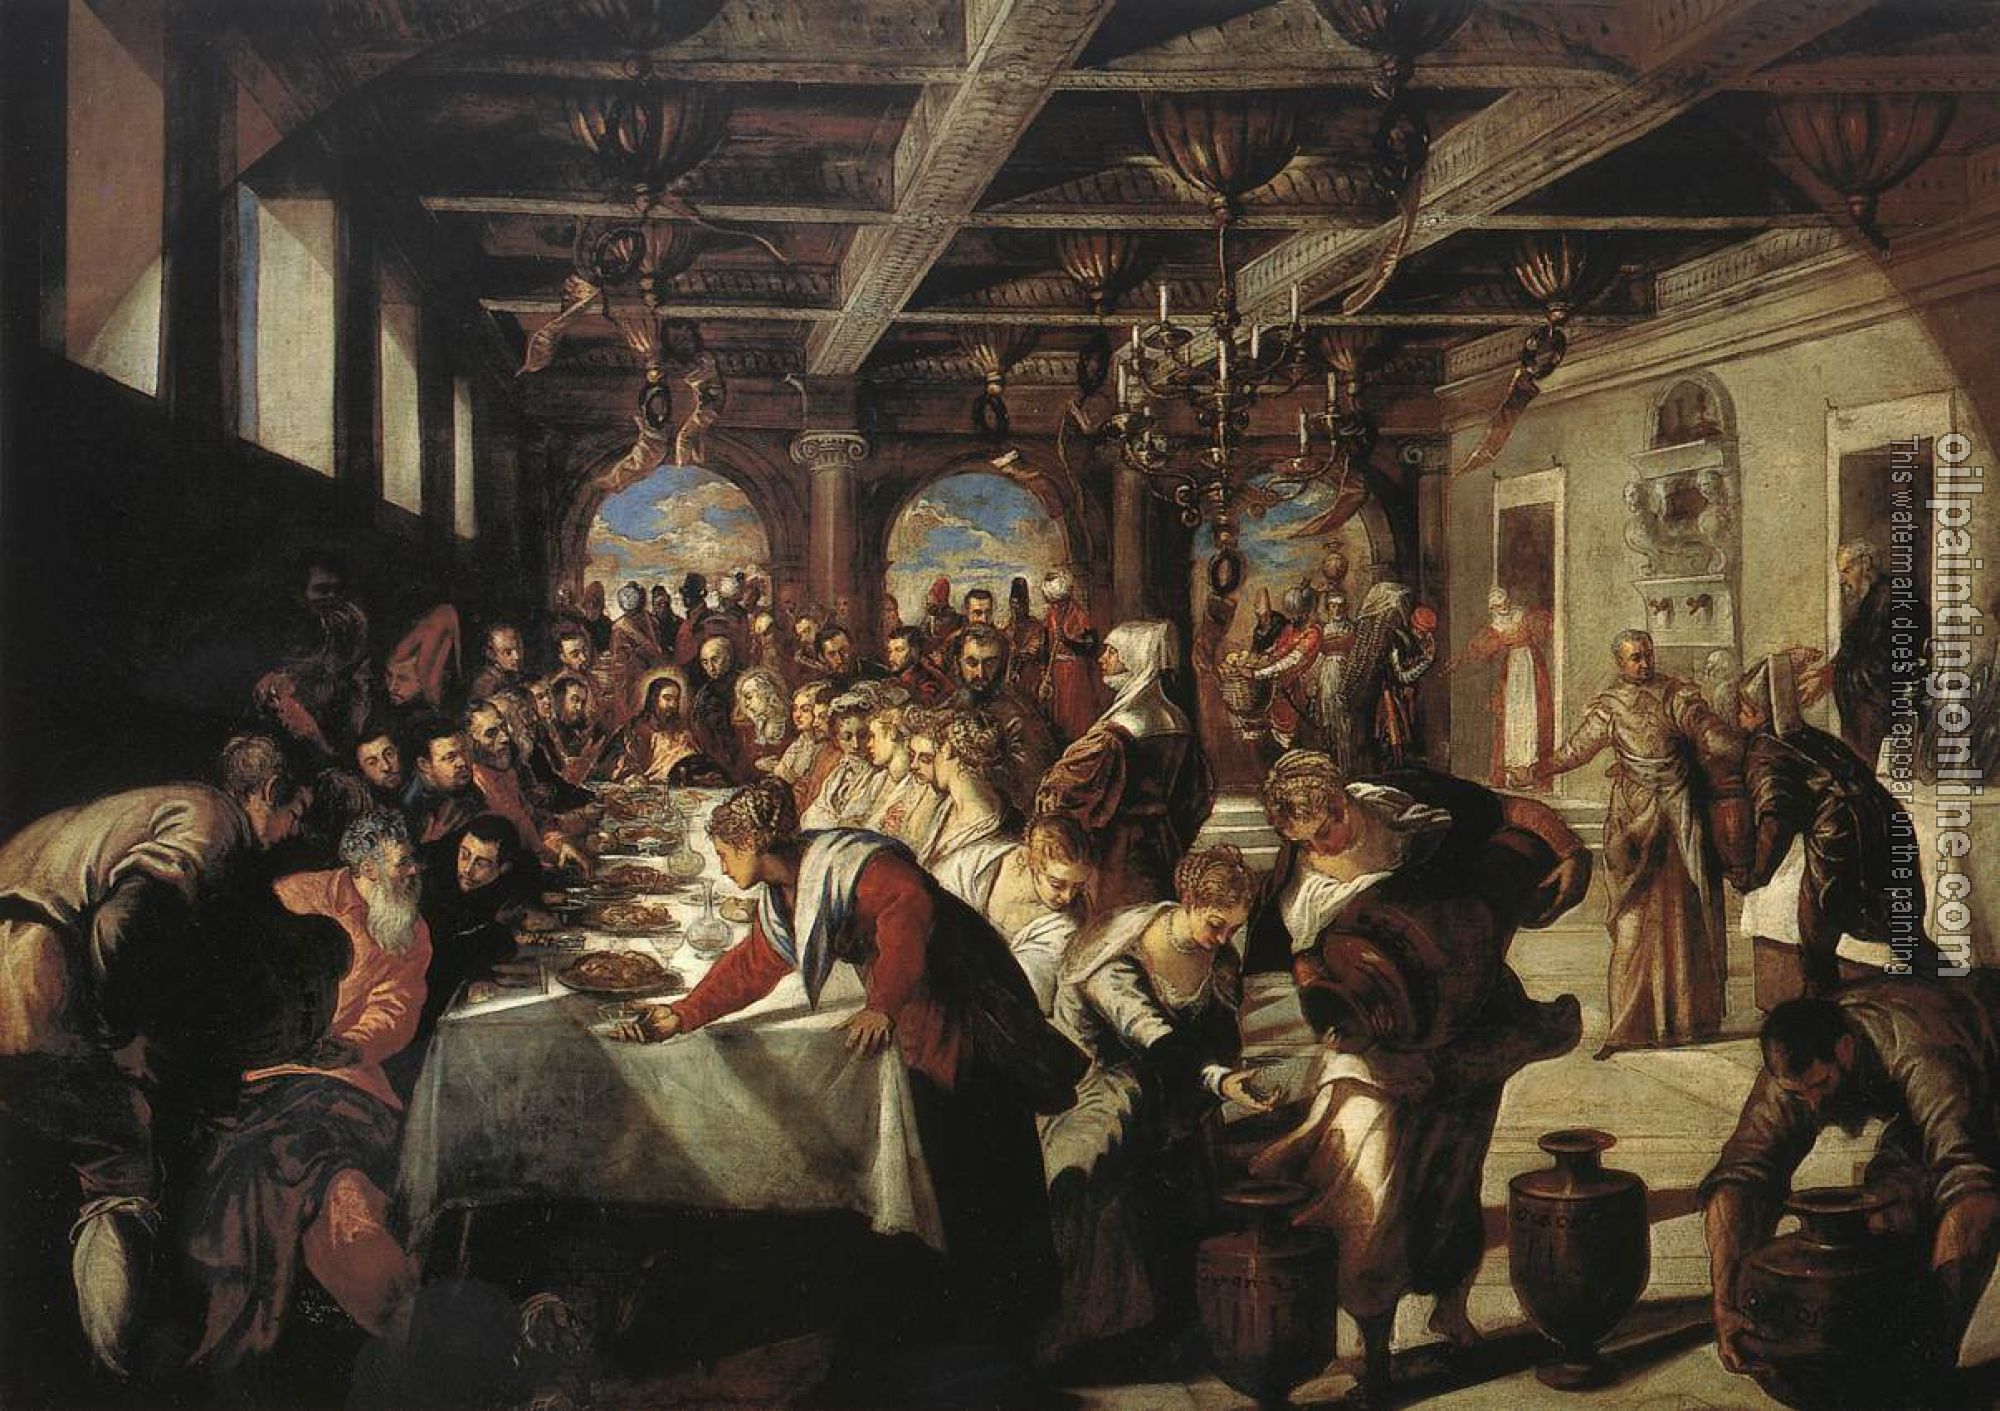 Jacopo Robusti Tintoretto - Marriage at Cana